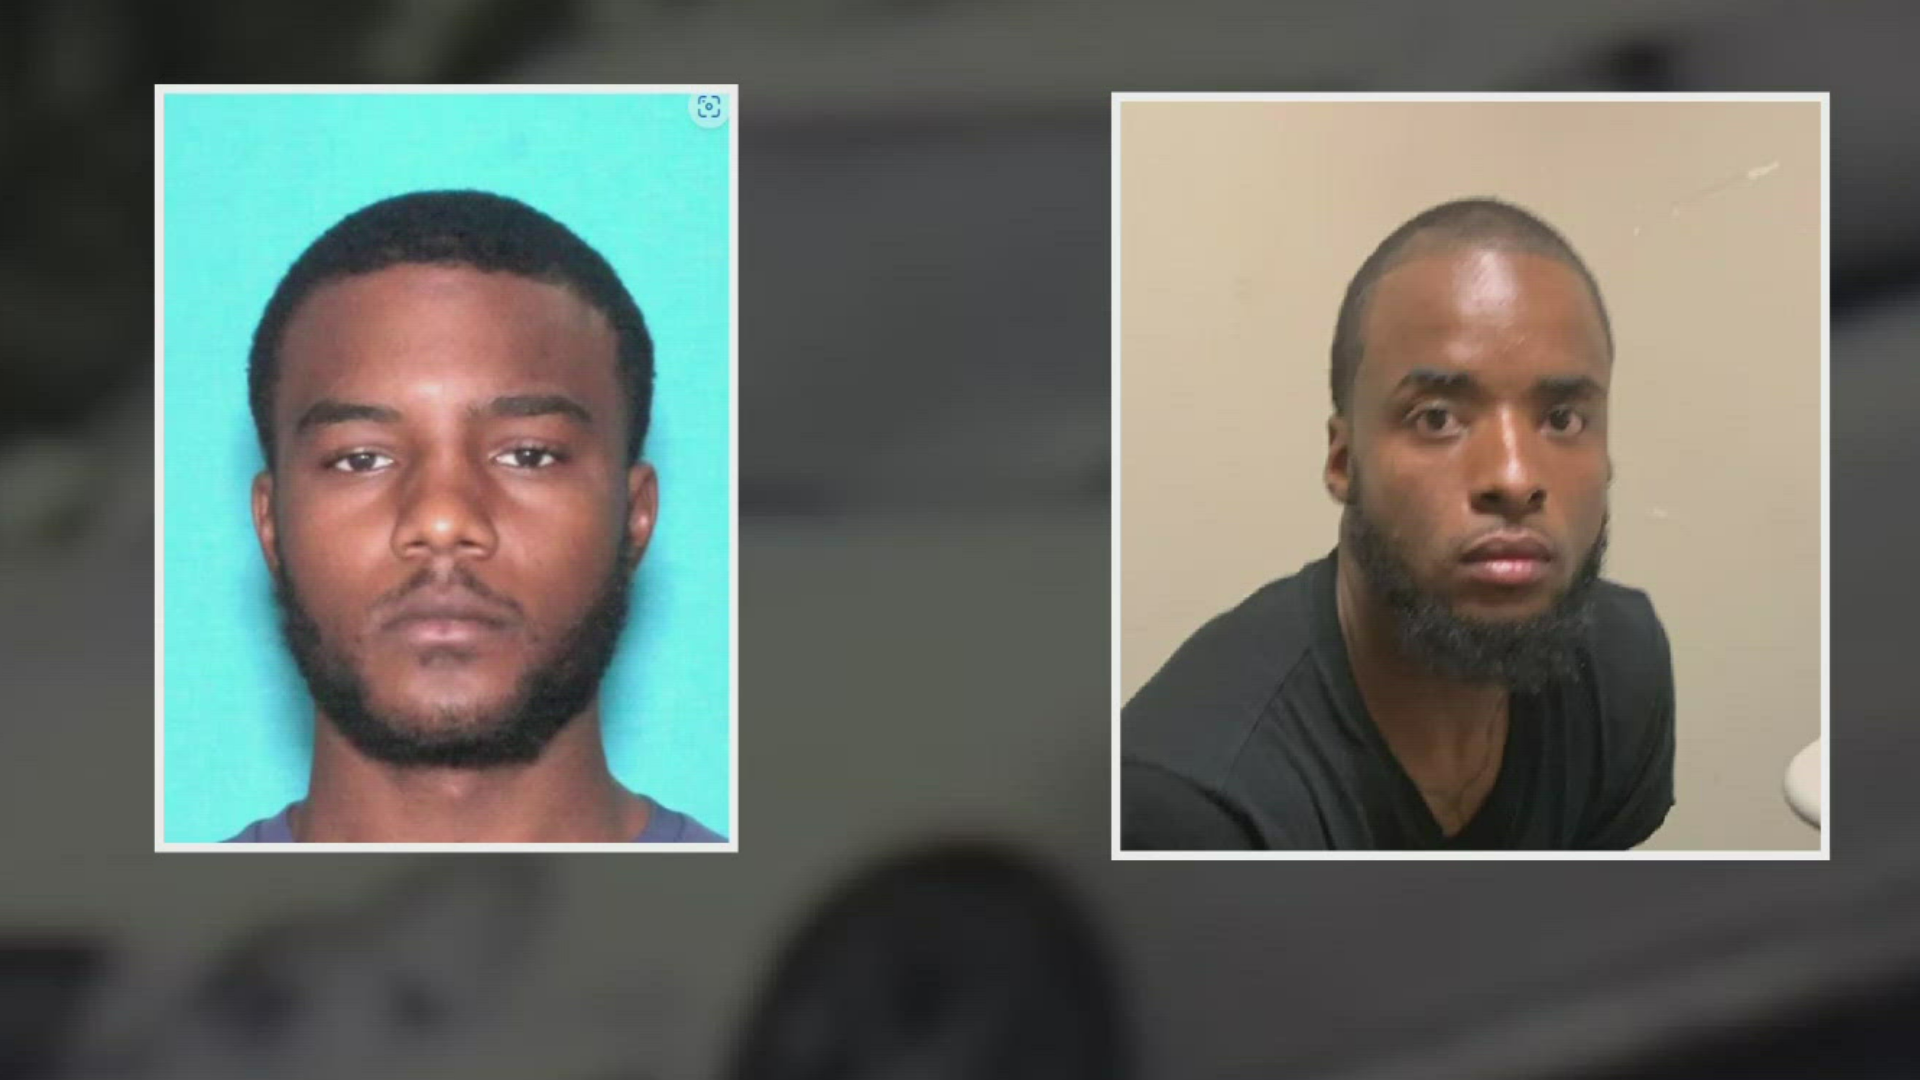 Detectives are still investigating a motive in the Monday morning homicide, telling WWL-TV that one of the suspects confessed to the crime.